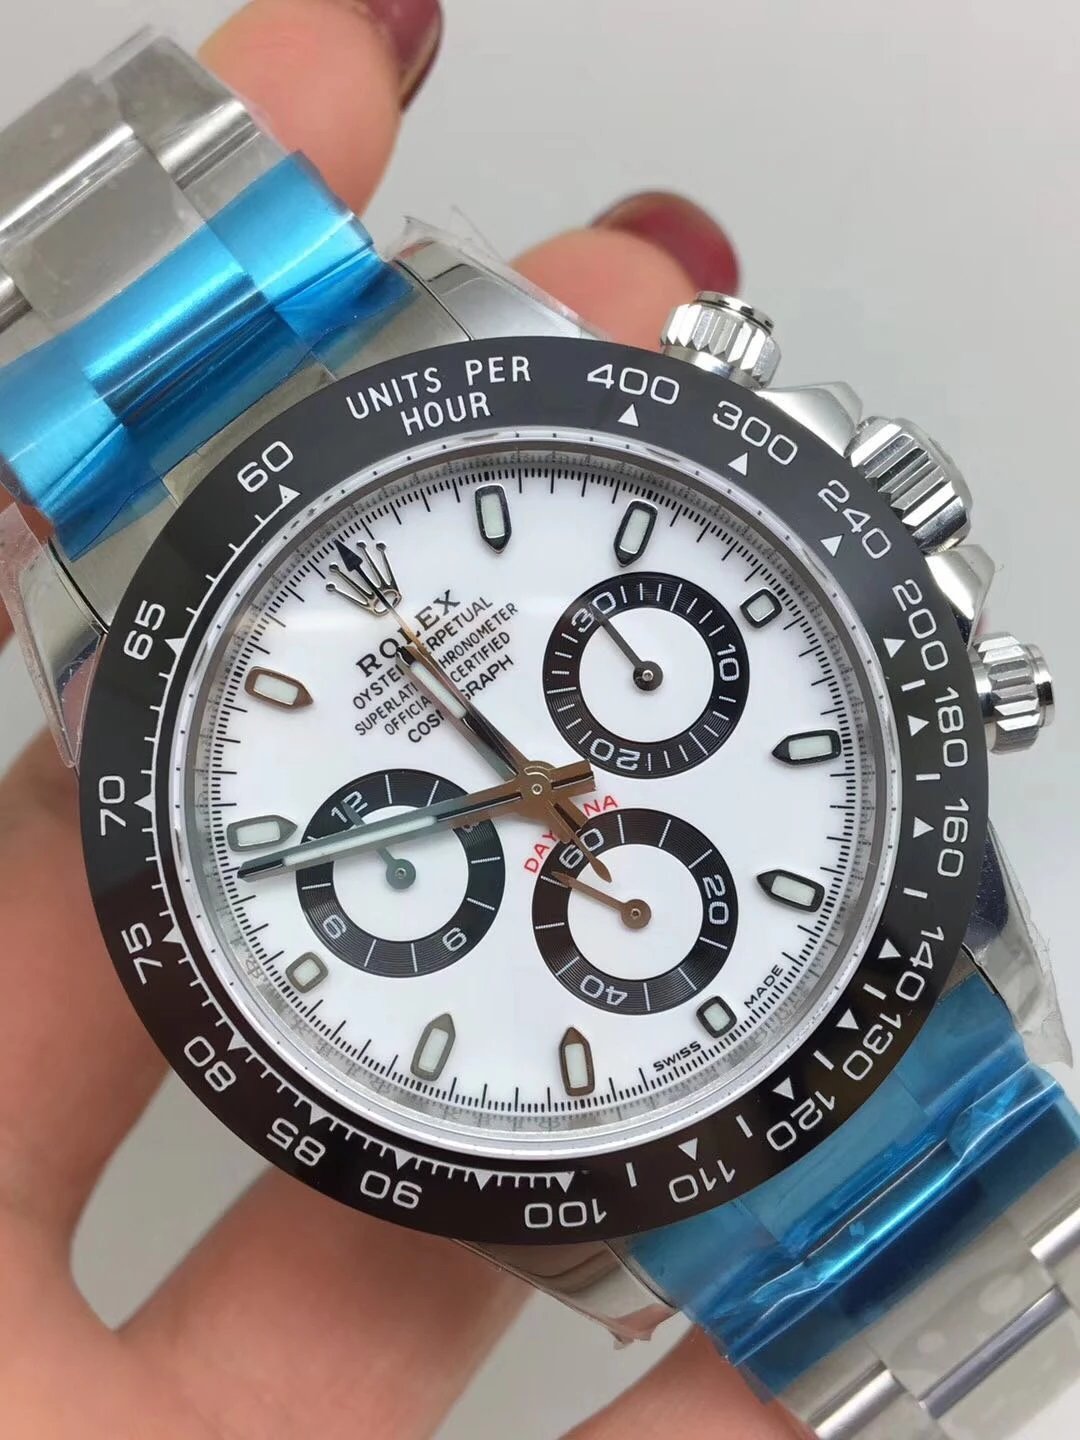 ROLEX DAYTONA REPLICA CERAMICHON WATCHES IN 2018 WITH 4130 FULLY CHRONOGRAPH MOVEMENT WHITE DIAL4